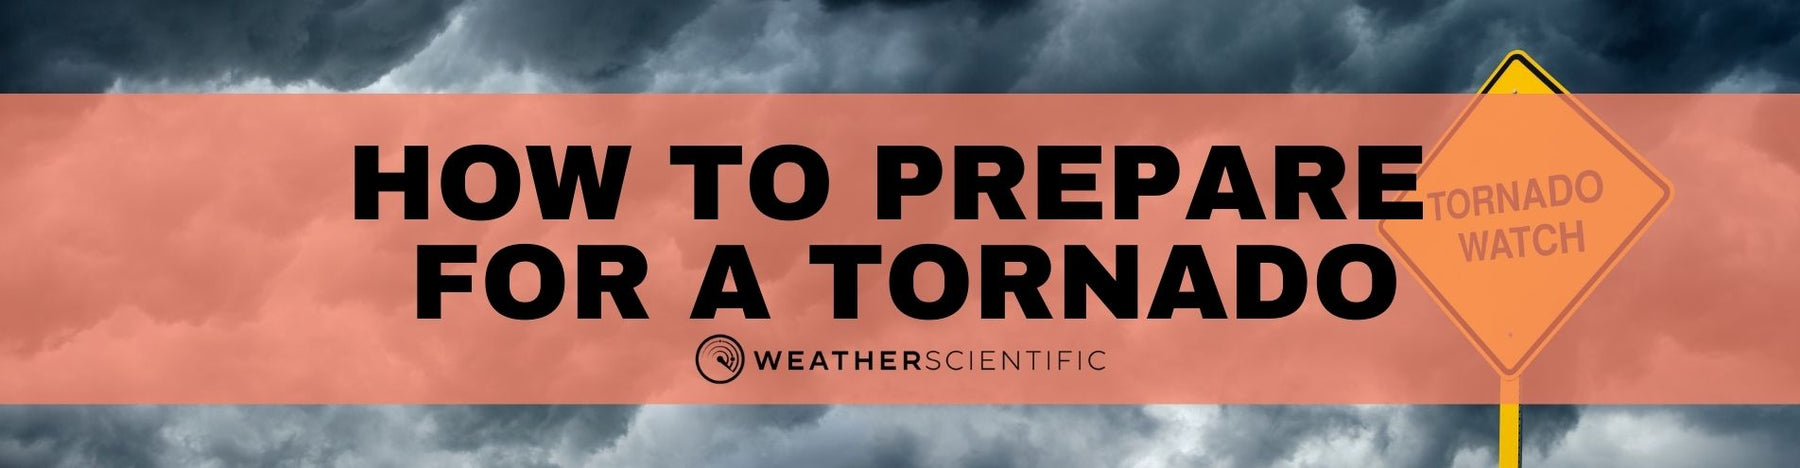 How to Prepare for a Tornado by Weather Scientific